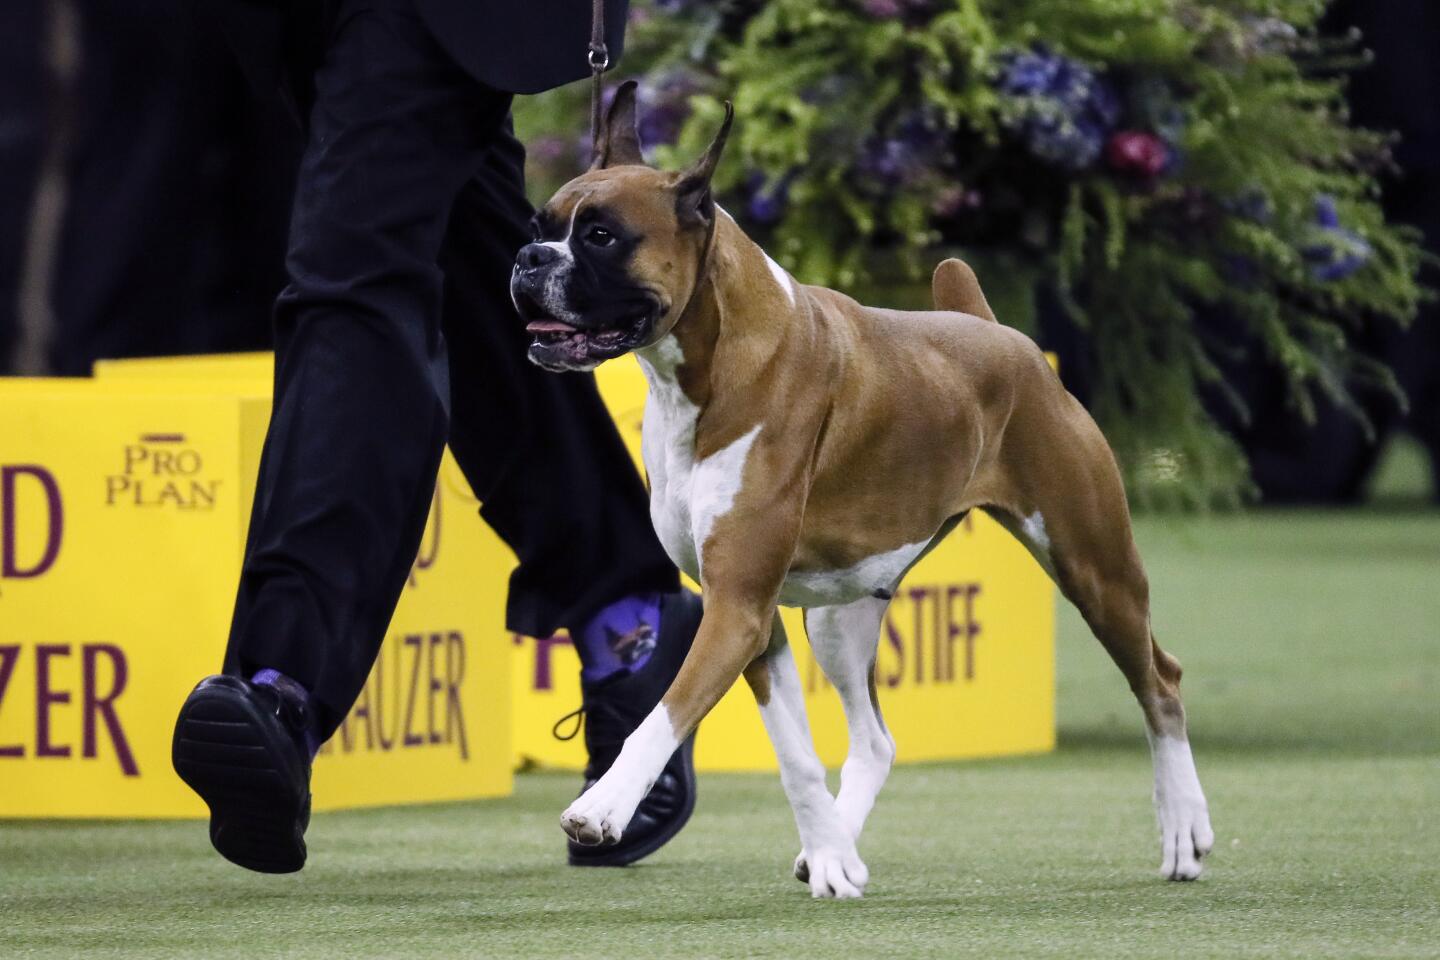 Wilma, a boxer, also made the final grouping.